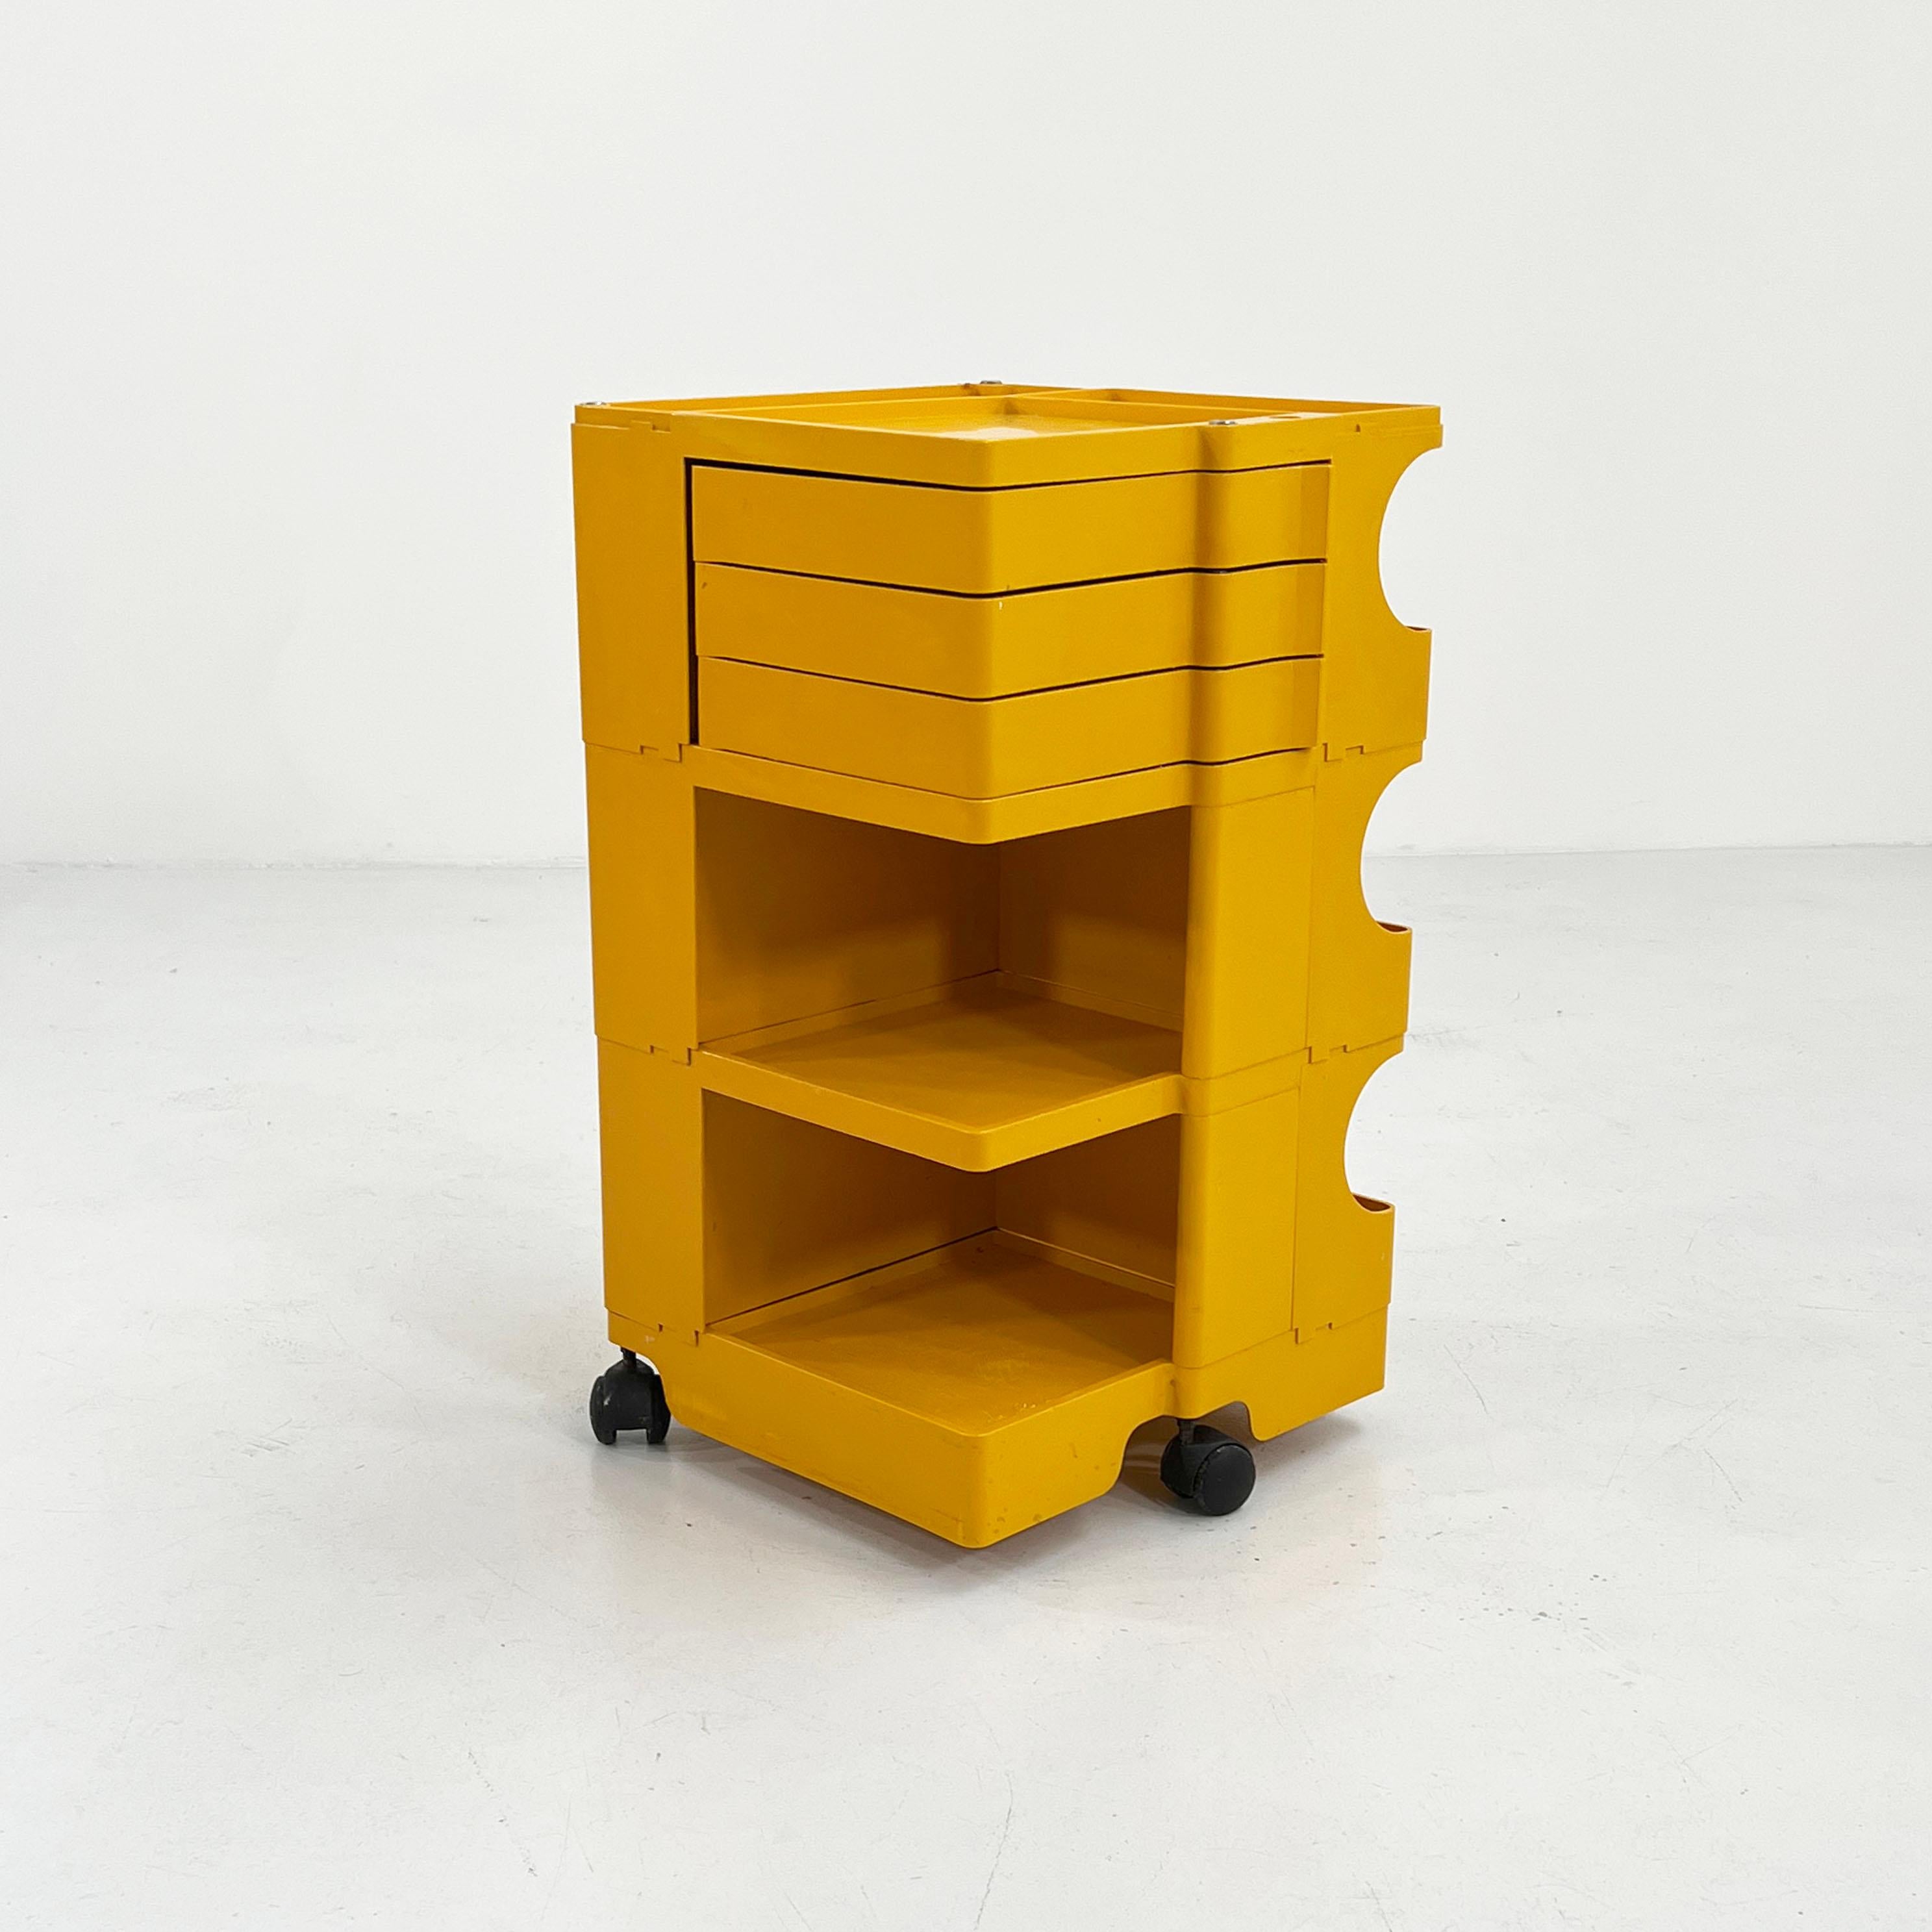 Designer - Joe Colombo 
Producer - Bieffeplast
Model - Boby Trolley
Design Period - Sixties
Measurements - Width 41 cm x Depth 39 cm x Height 74 cm
Materials - Plastic
Color - Yellow
Light wear consistent with age and use.